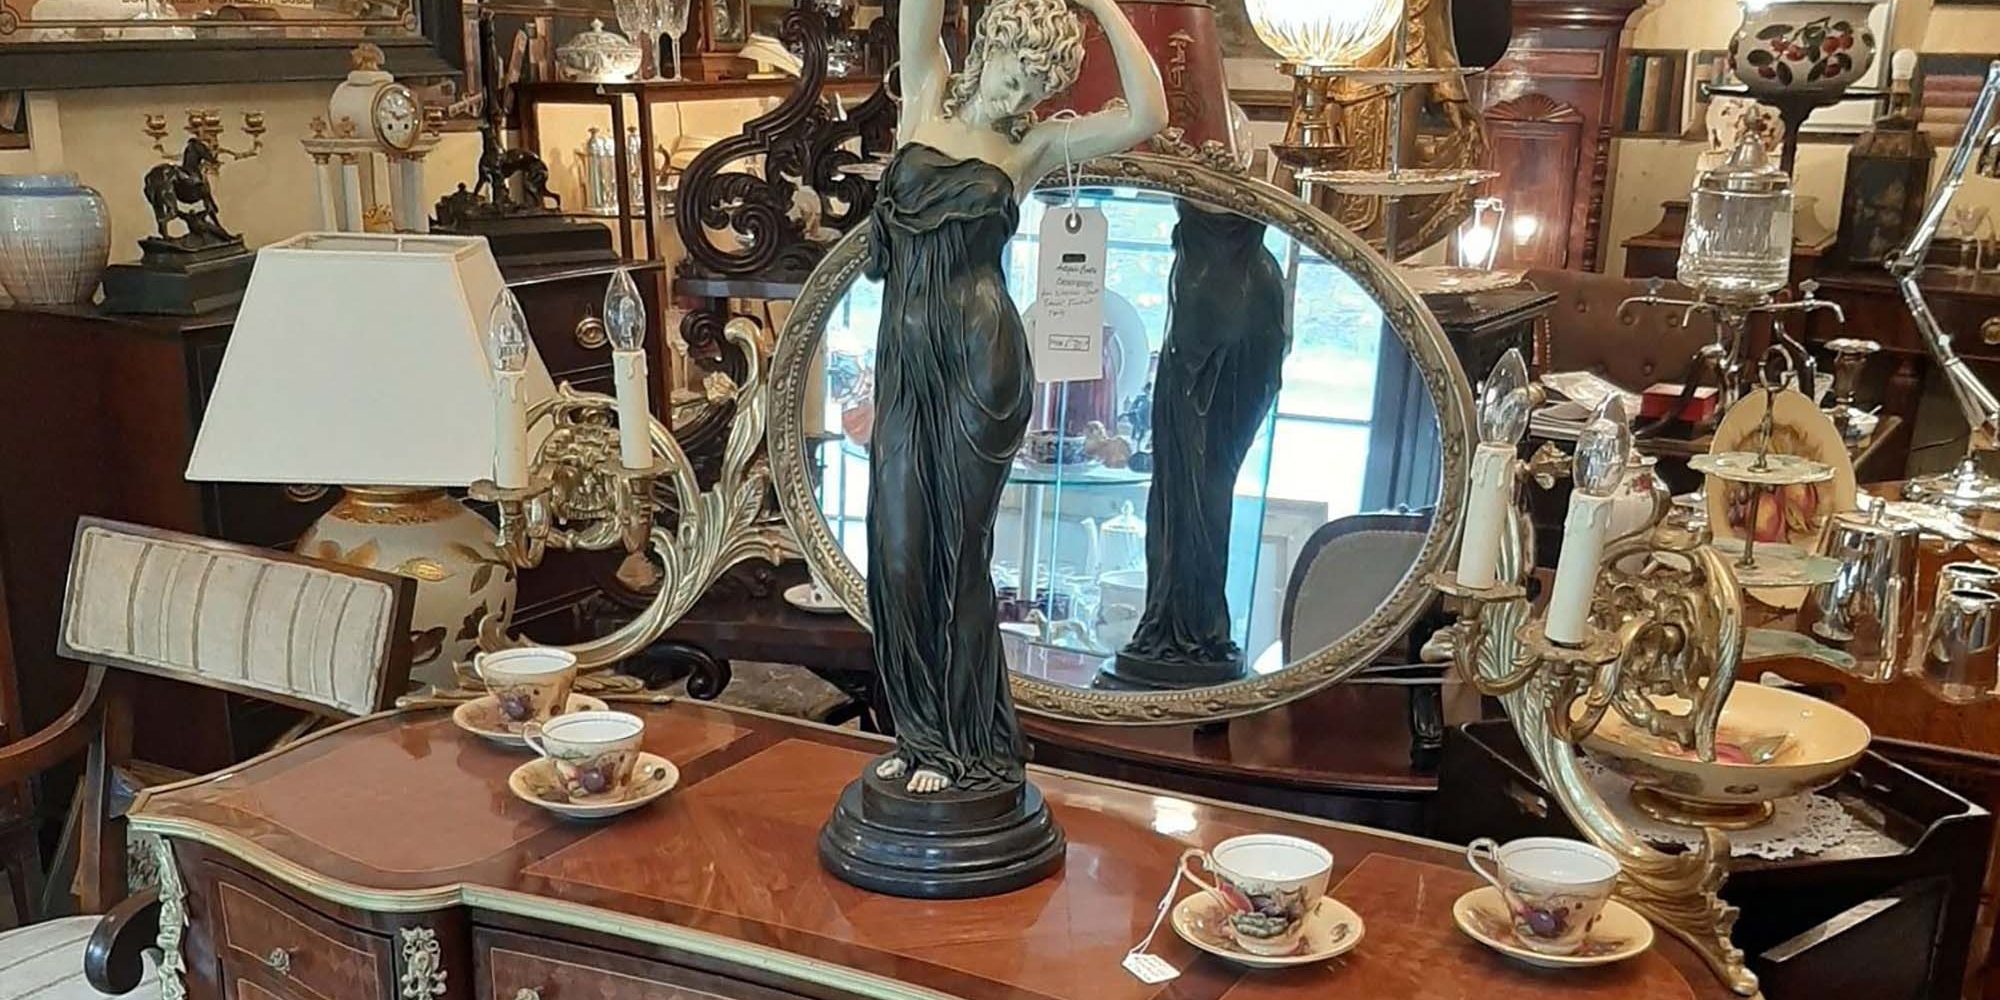 Antiques Interiors in Glaslough, Monaghan